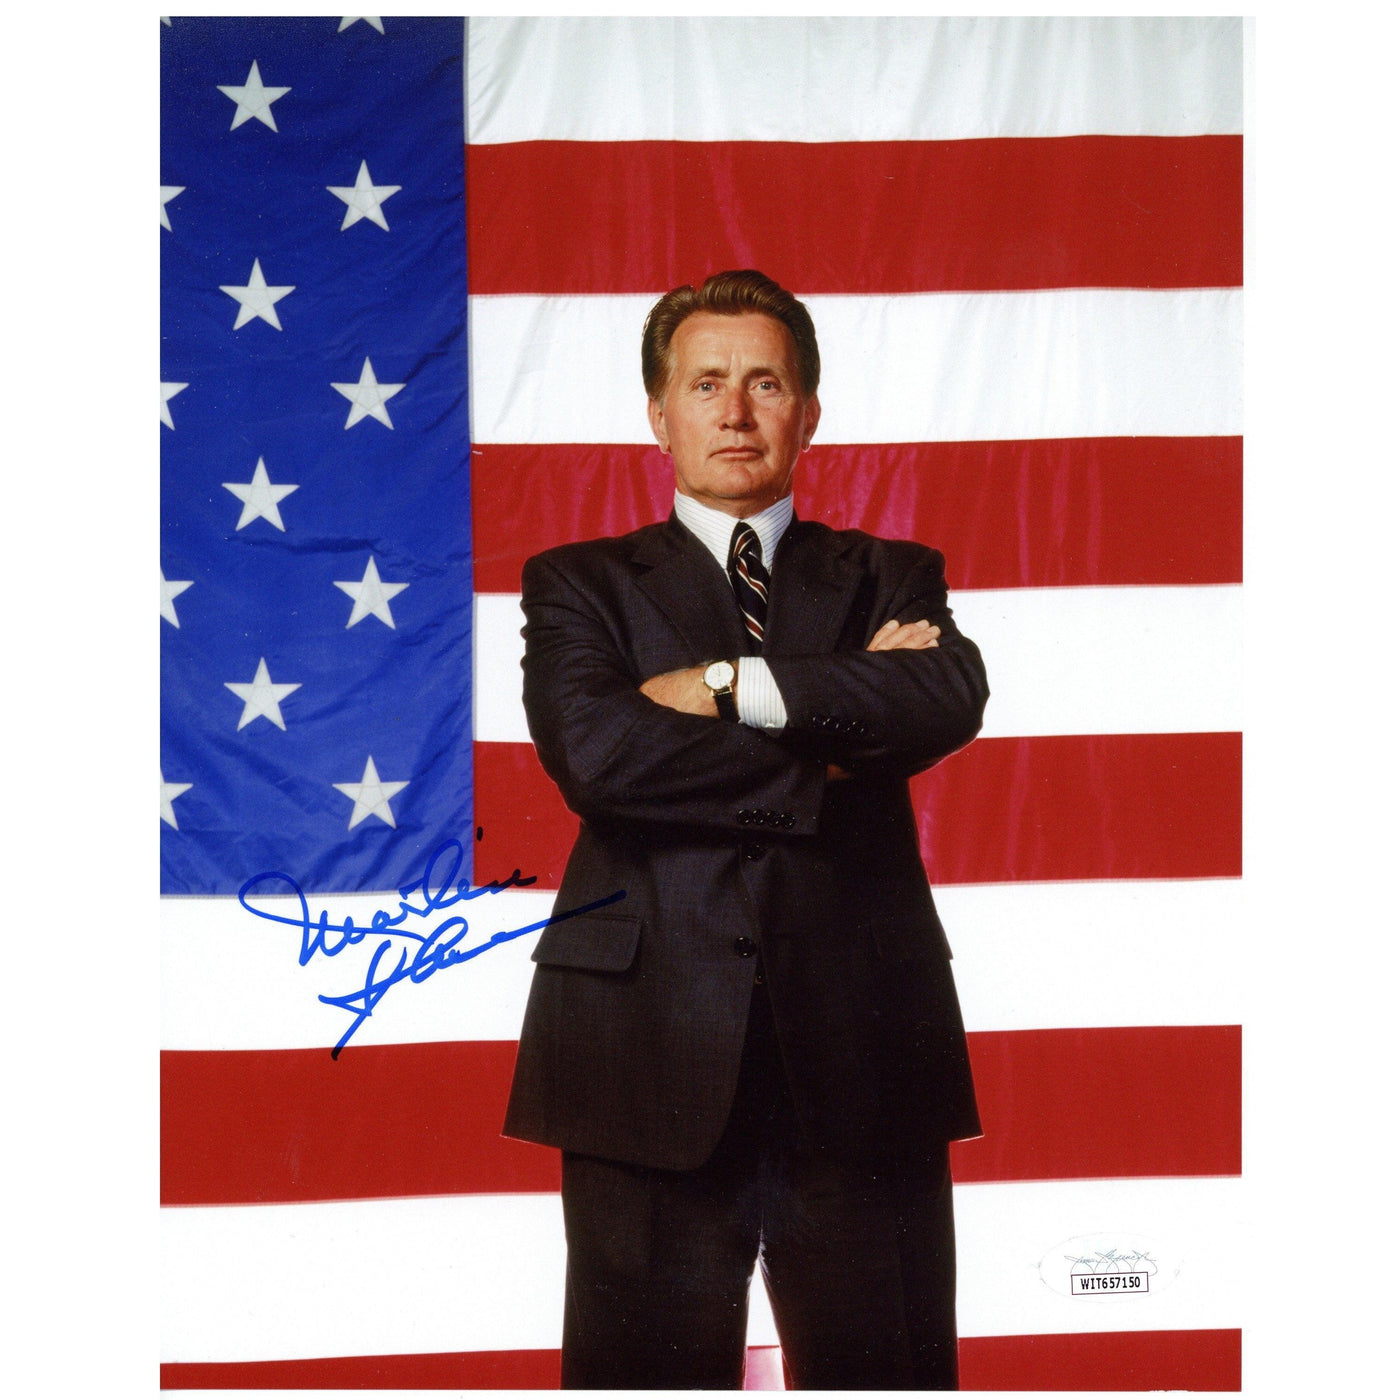 Martin Sheen Signed 8x10 Photo The West Wing President Bartlet Autographed JSA